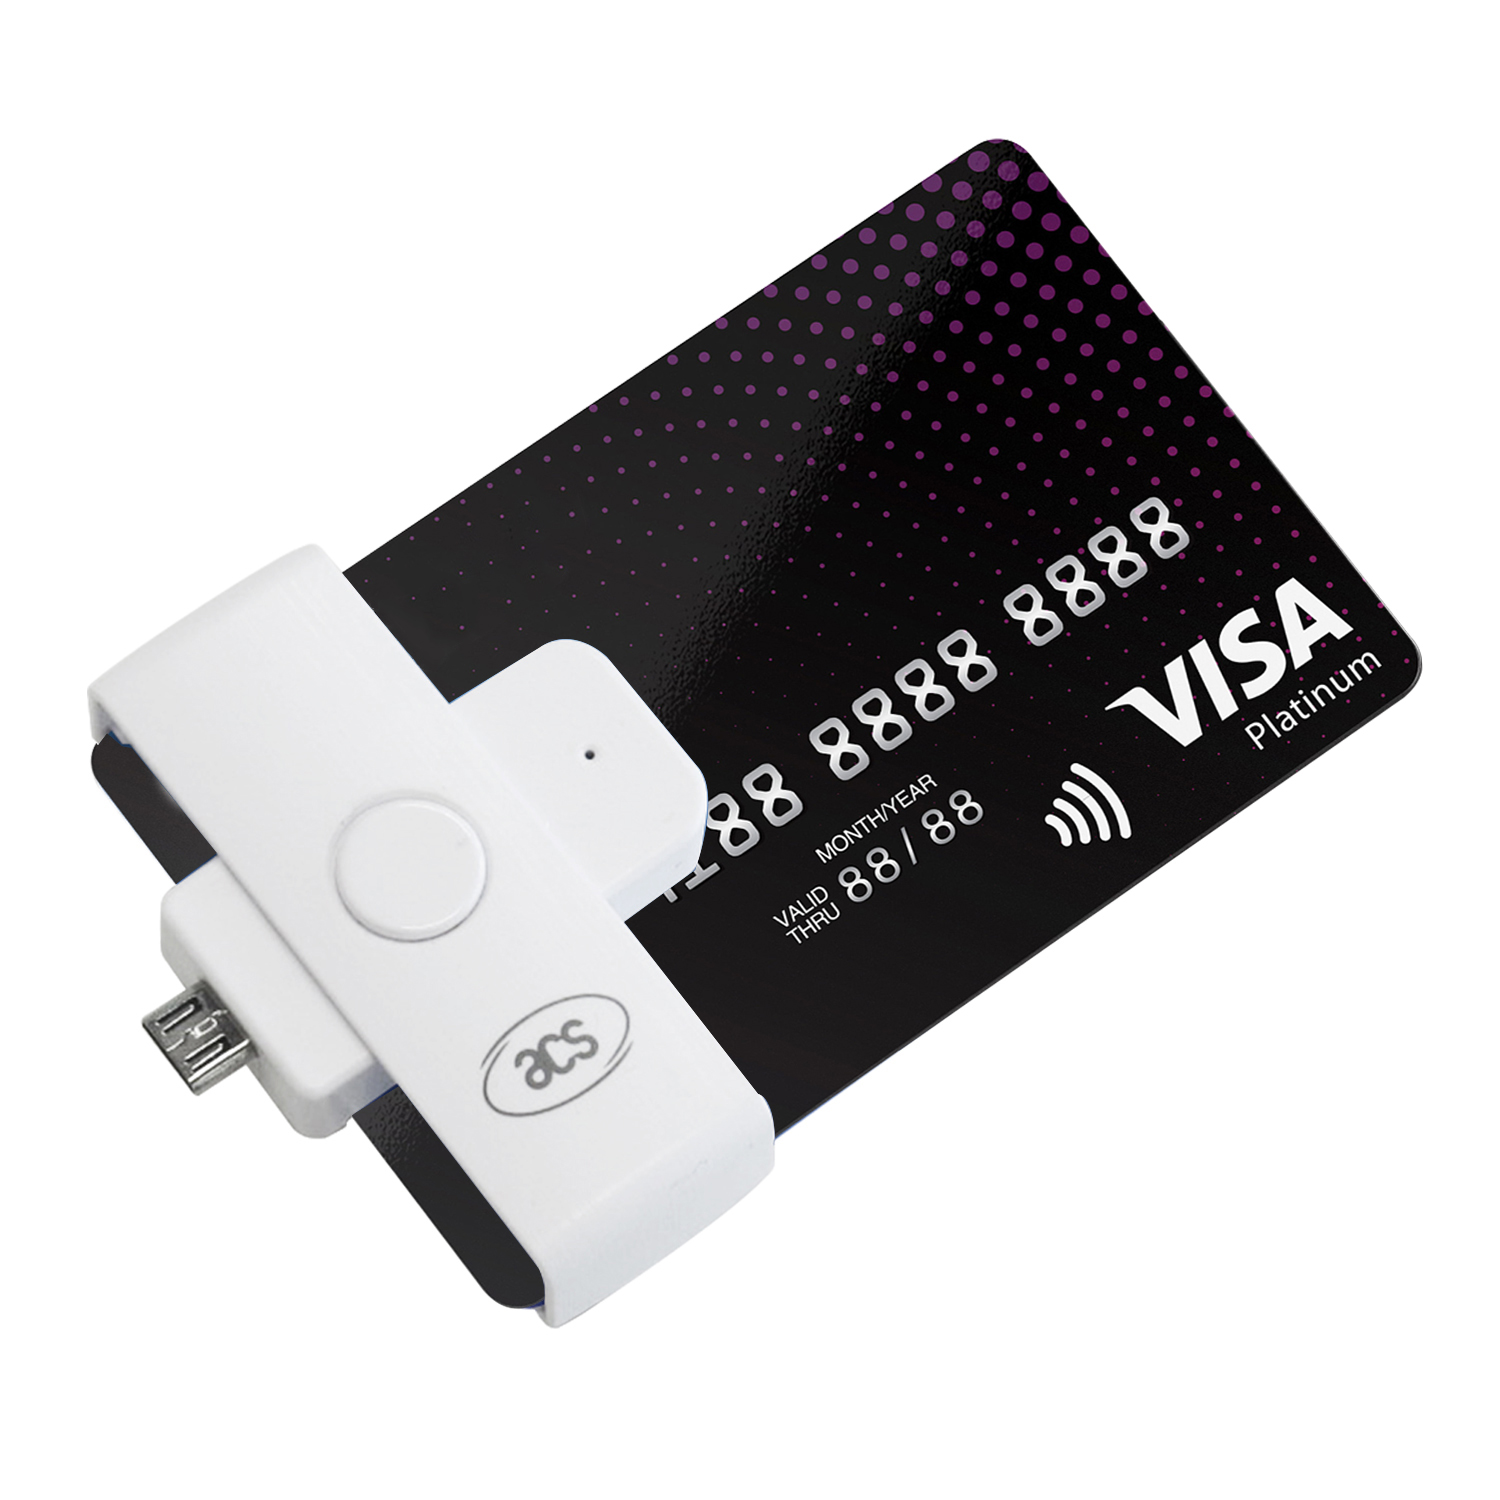 Best Micro USB ACS Contact Smart Card Reader For E-Banking ACR39U-ND